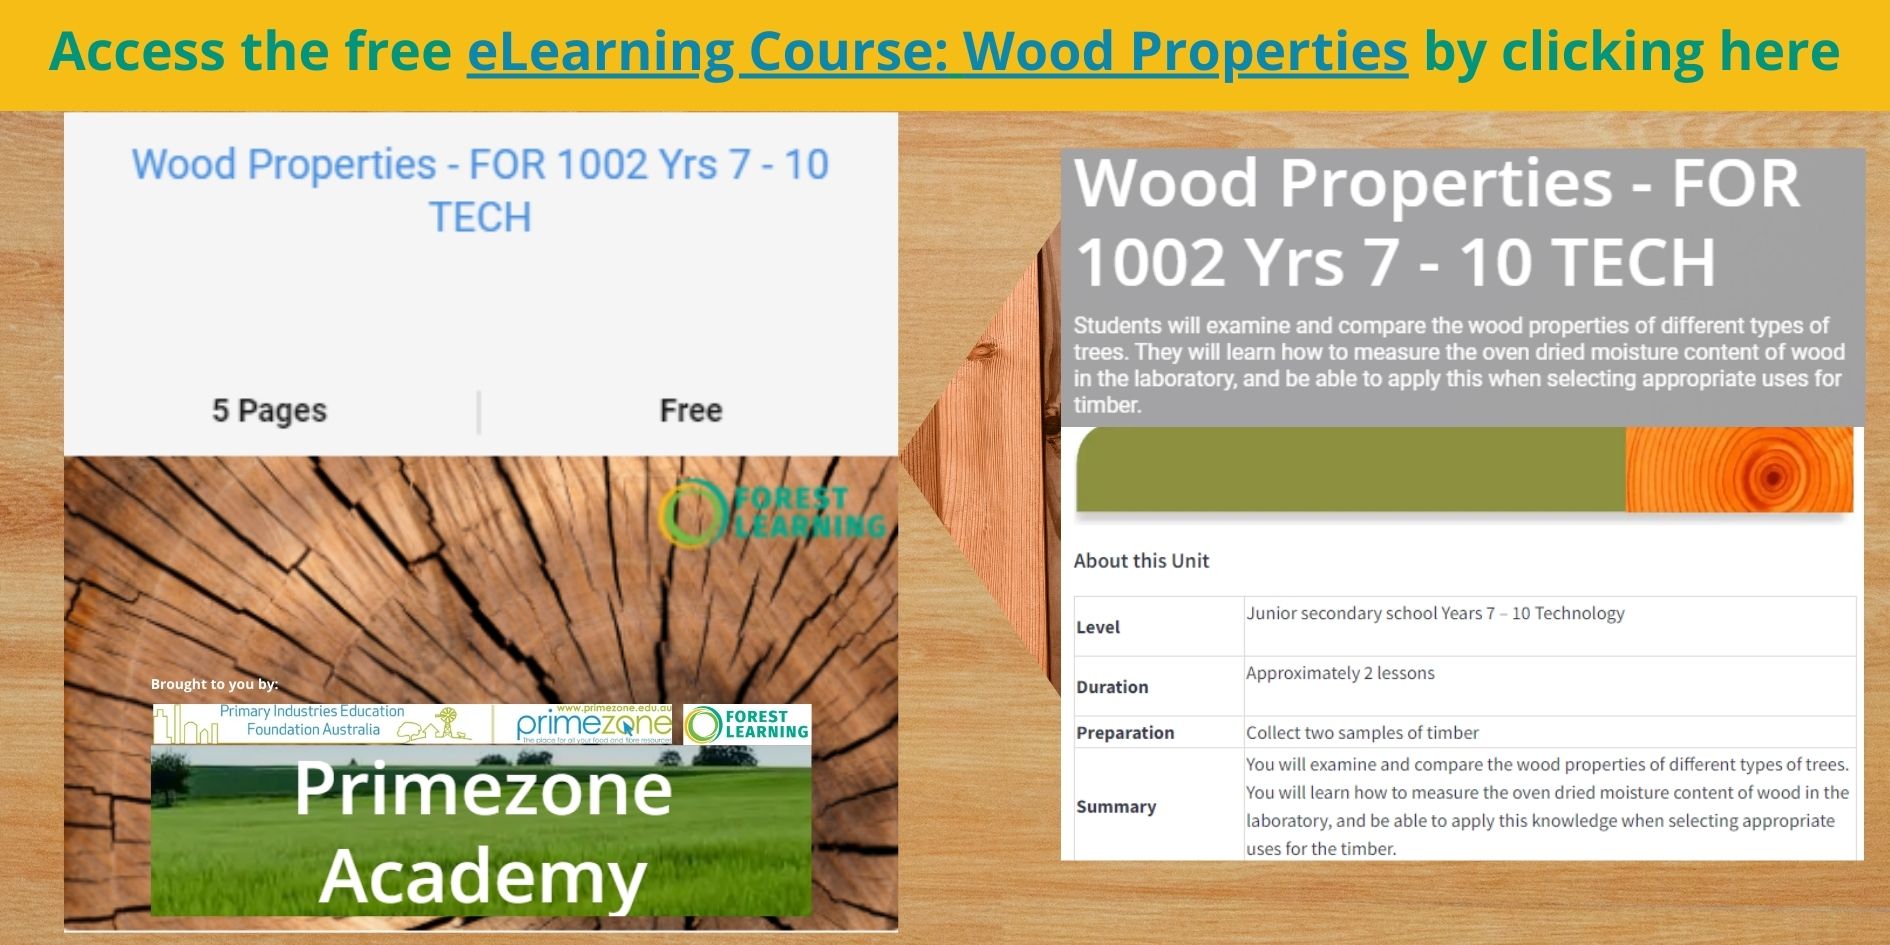 Access the free eLearning Course Wood Properies